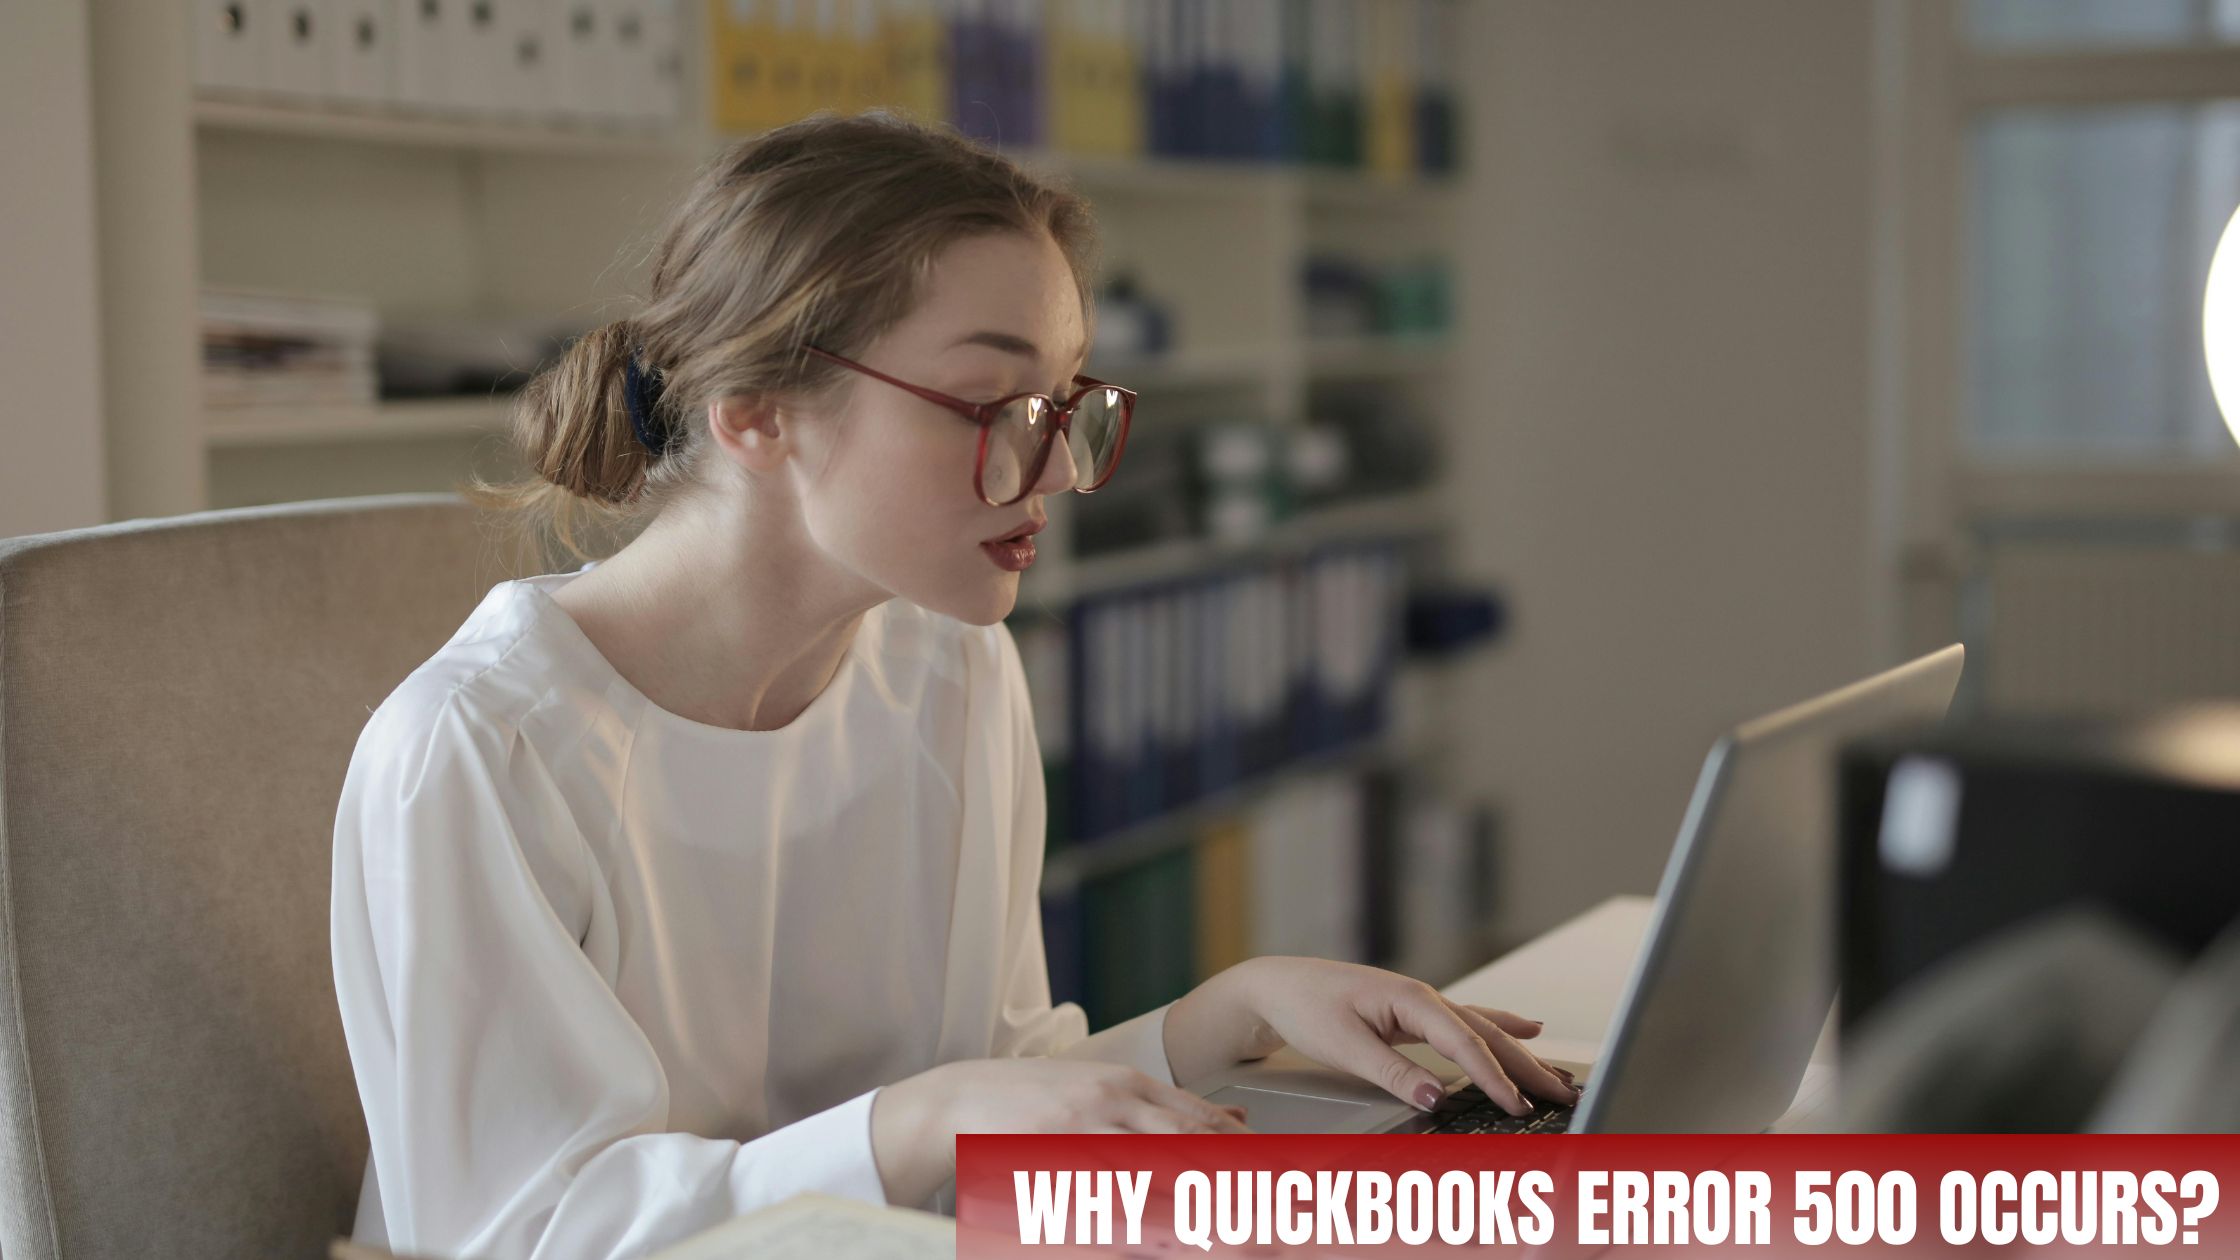 This Girl is Trying to Resolve QuickBooks Error 500